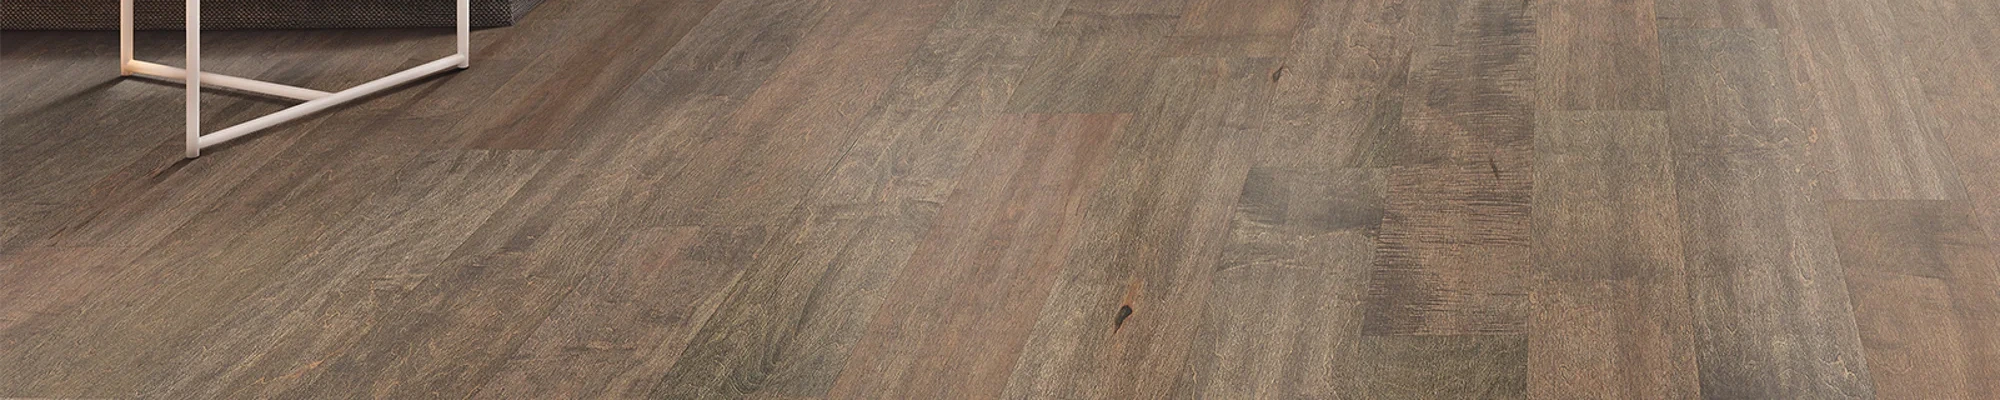 Hardwood flooring in Builder Wholesale Finishers in the Mid-Michigan area